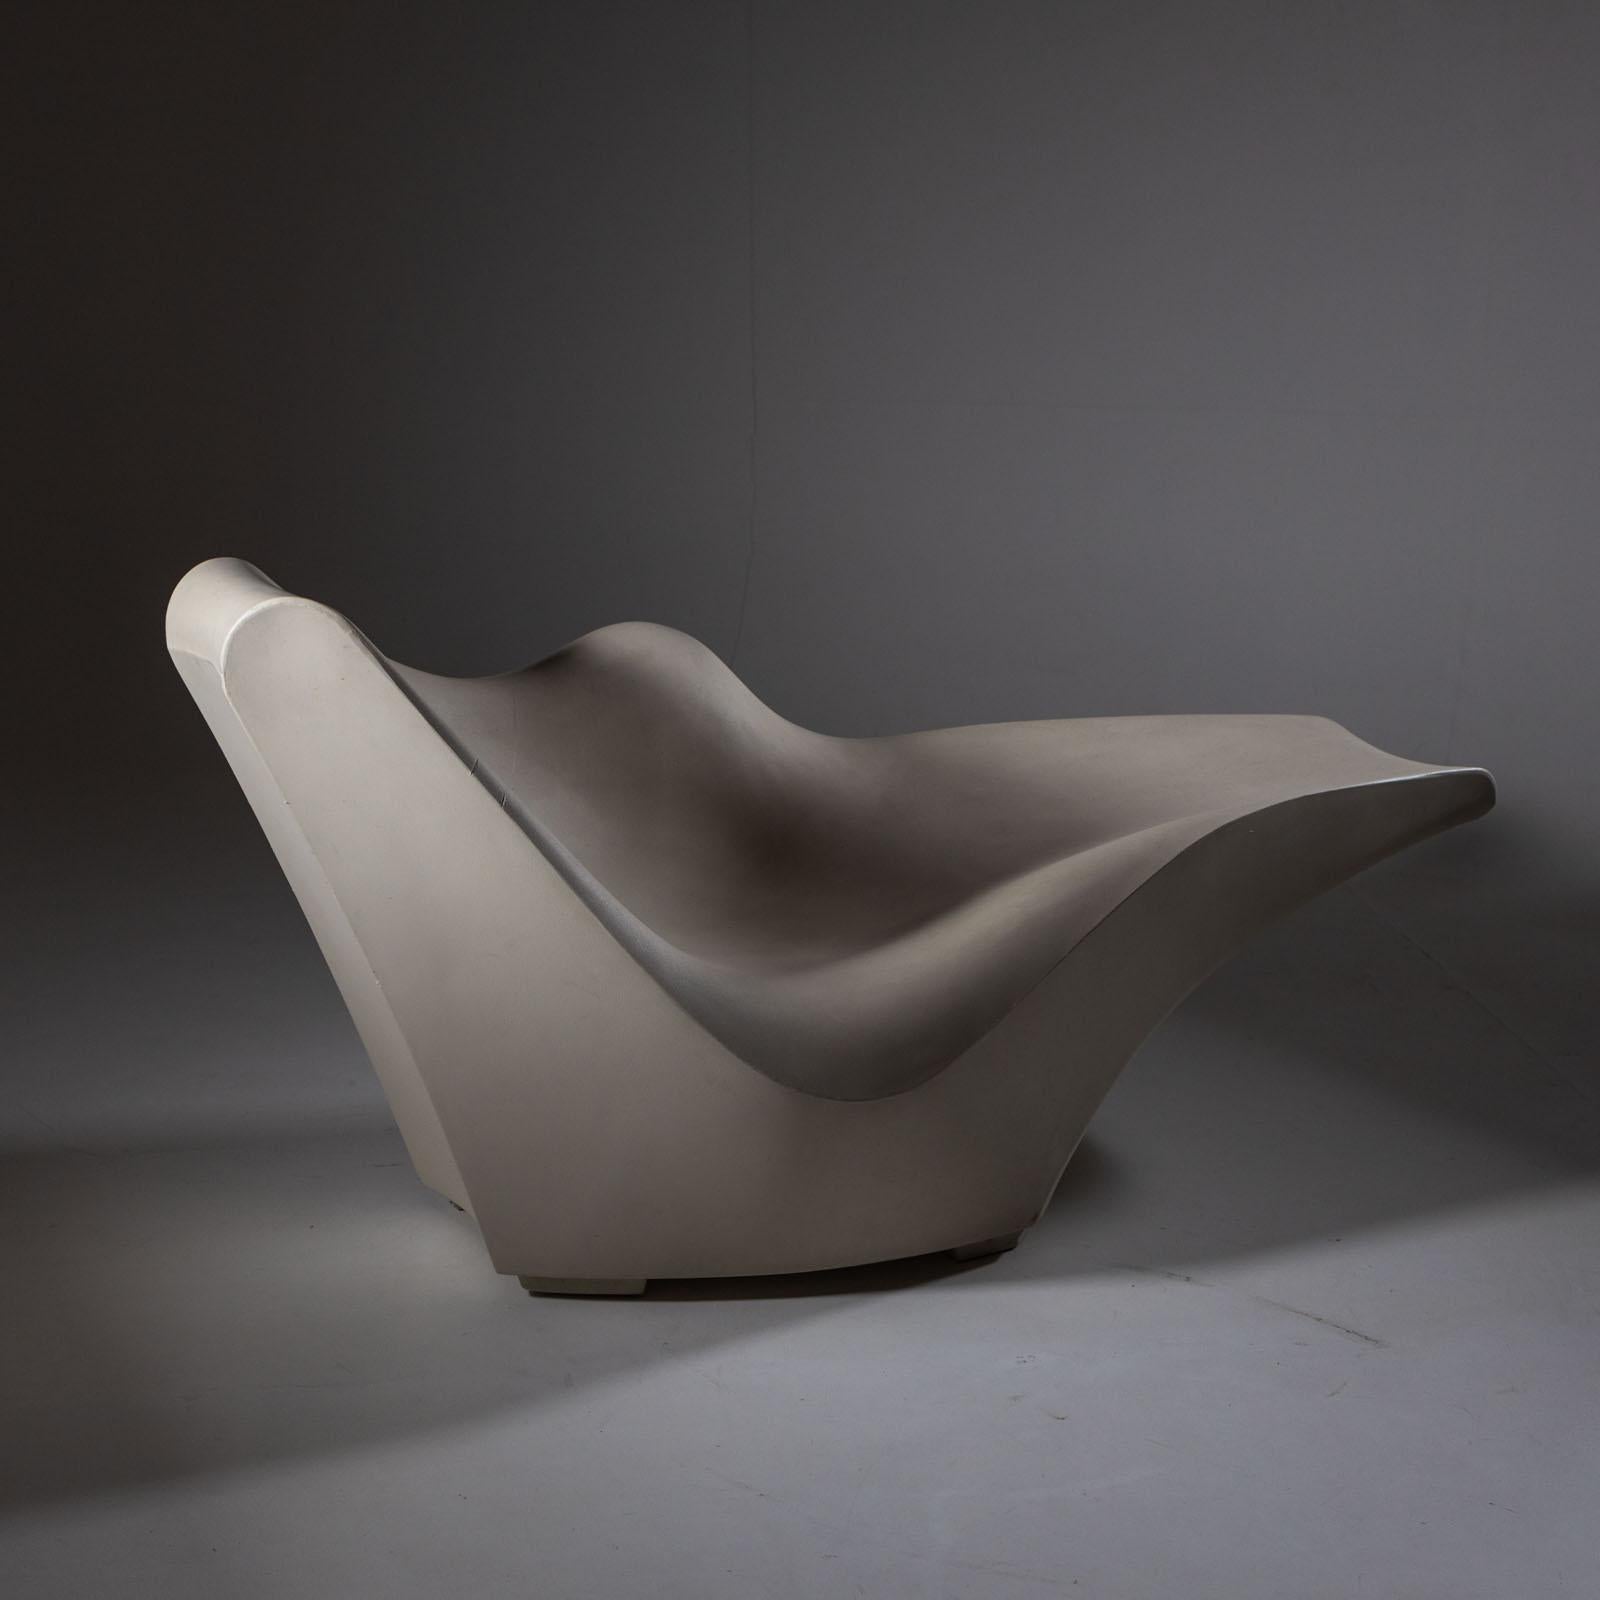 Large organically shaped Tokyo Pop lounger designed by Tokujin Yoshioka for Driade in the early 2000s. The large lounger is made of off-white plastic.